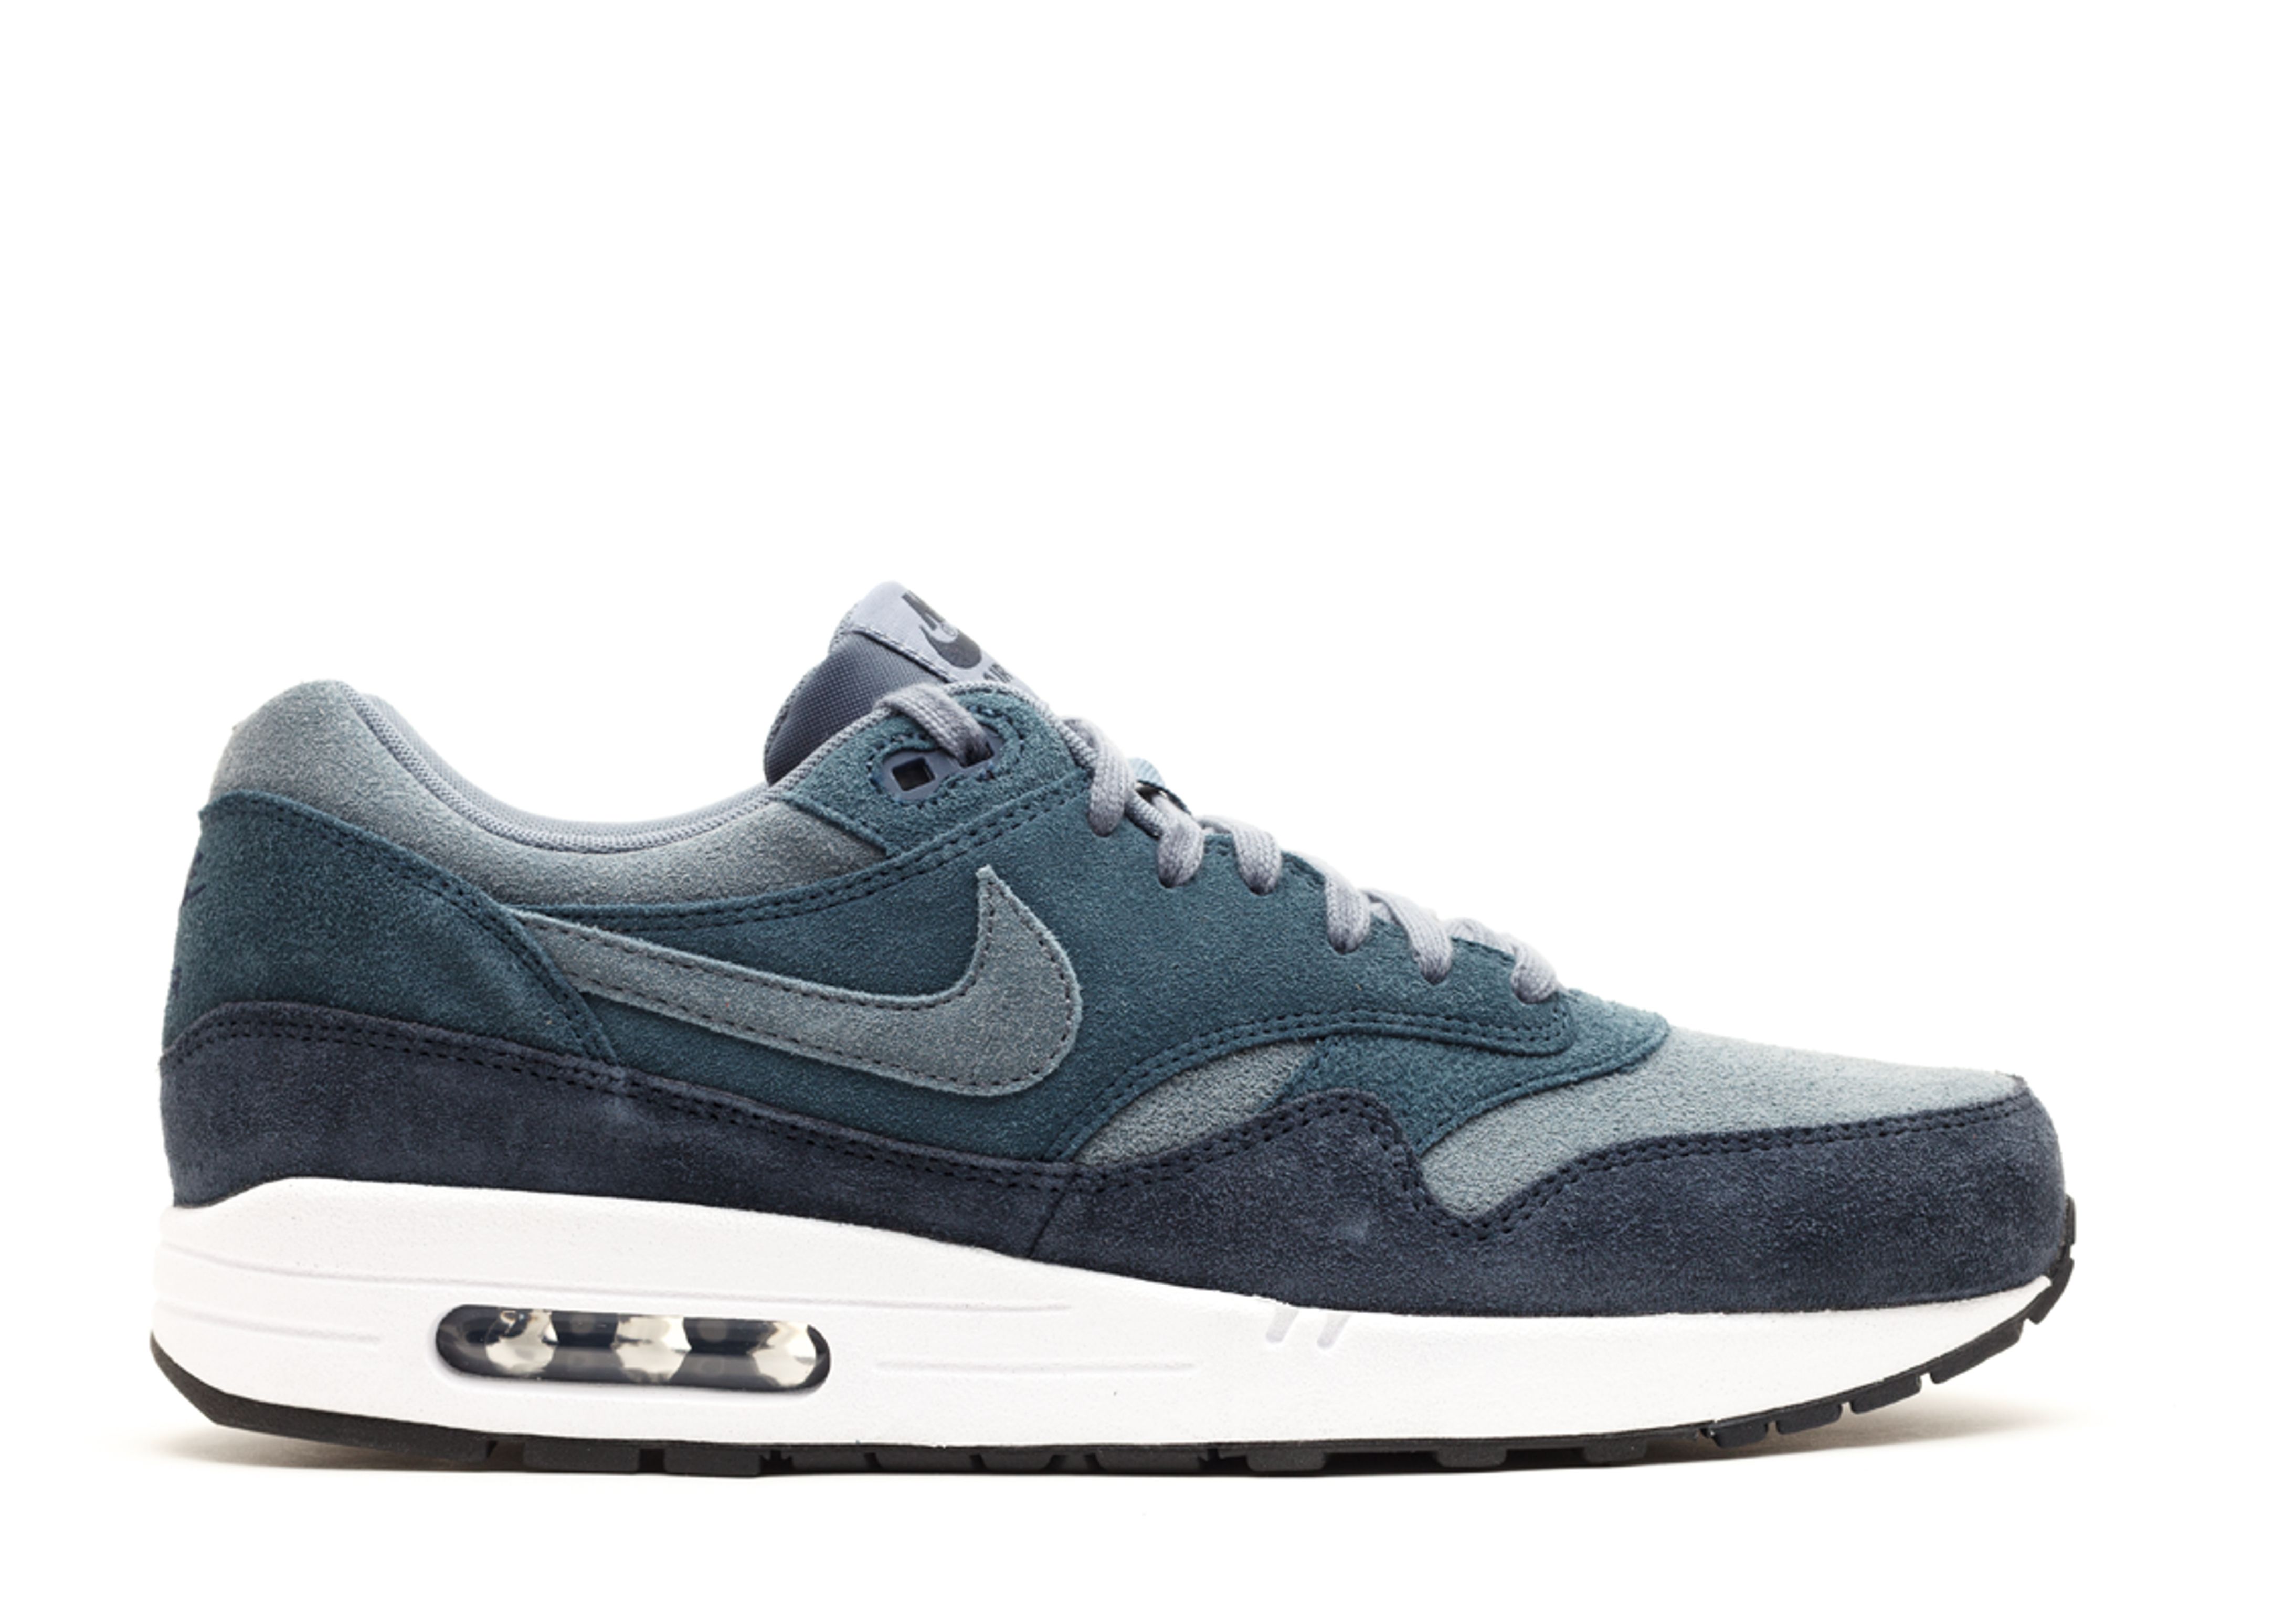 Nike Air Max 1 Armory Navy 2018 for Sale, Authenticity Guaranteed